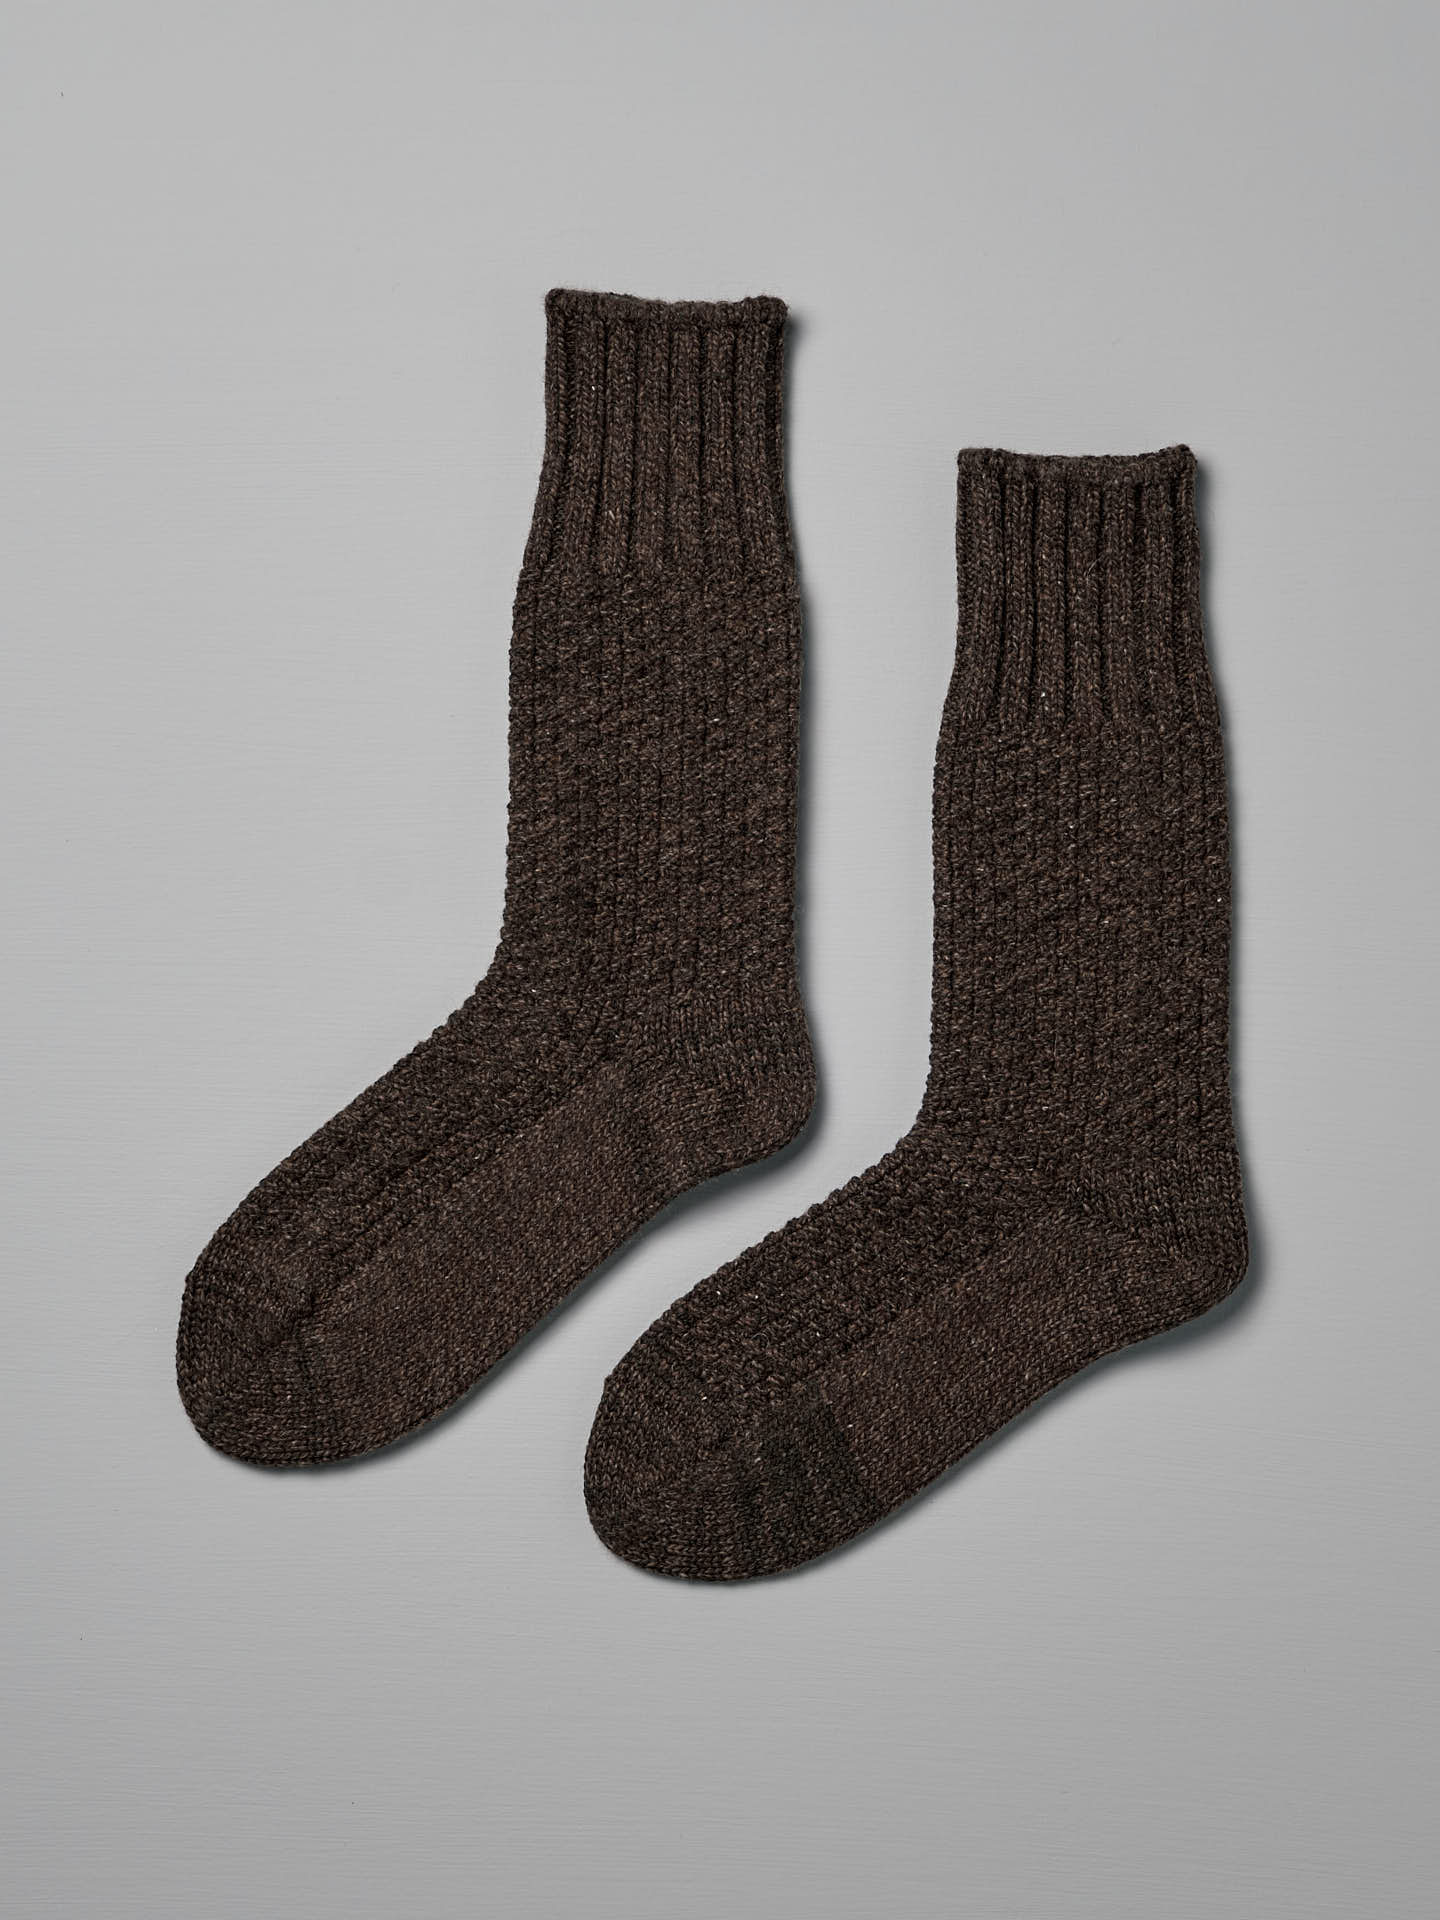 A pair of dark brown, knitted wool socks with a ribbed cuff placed side by side on a light gray background, available in both US Men's sizes and EUR sizes, **Wool Cotton Boot Socks – Brown** by **Nishiguchi Kutsushita**.